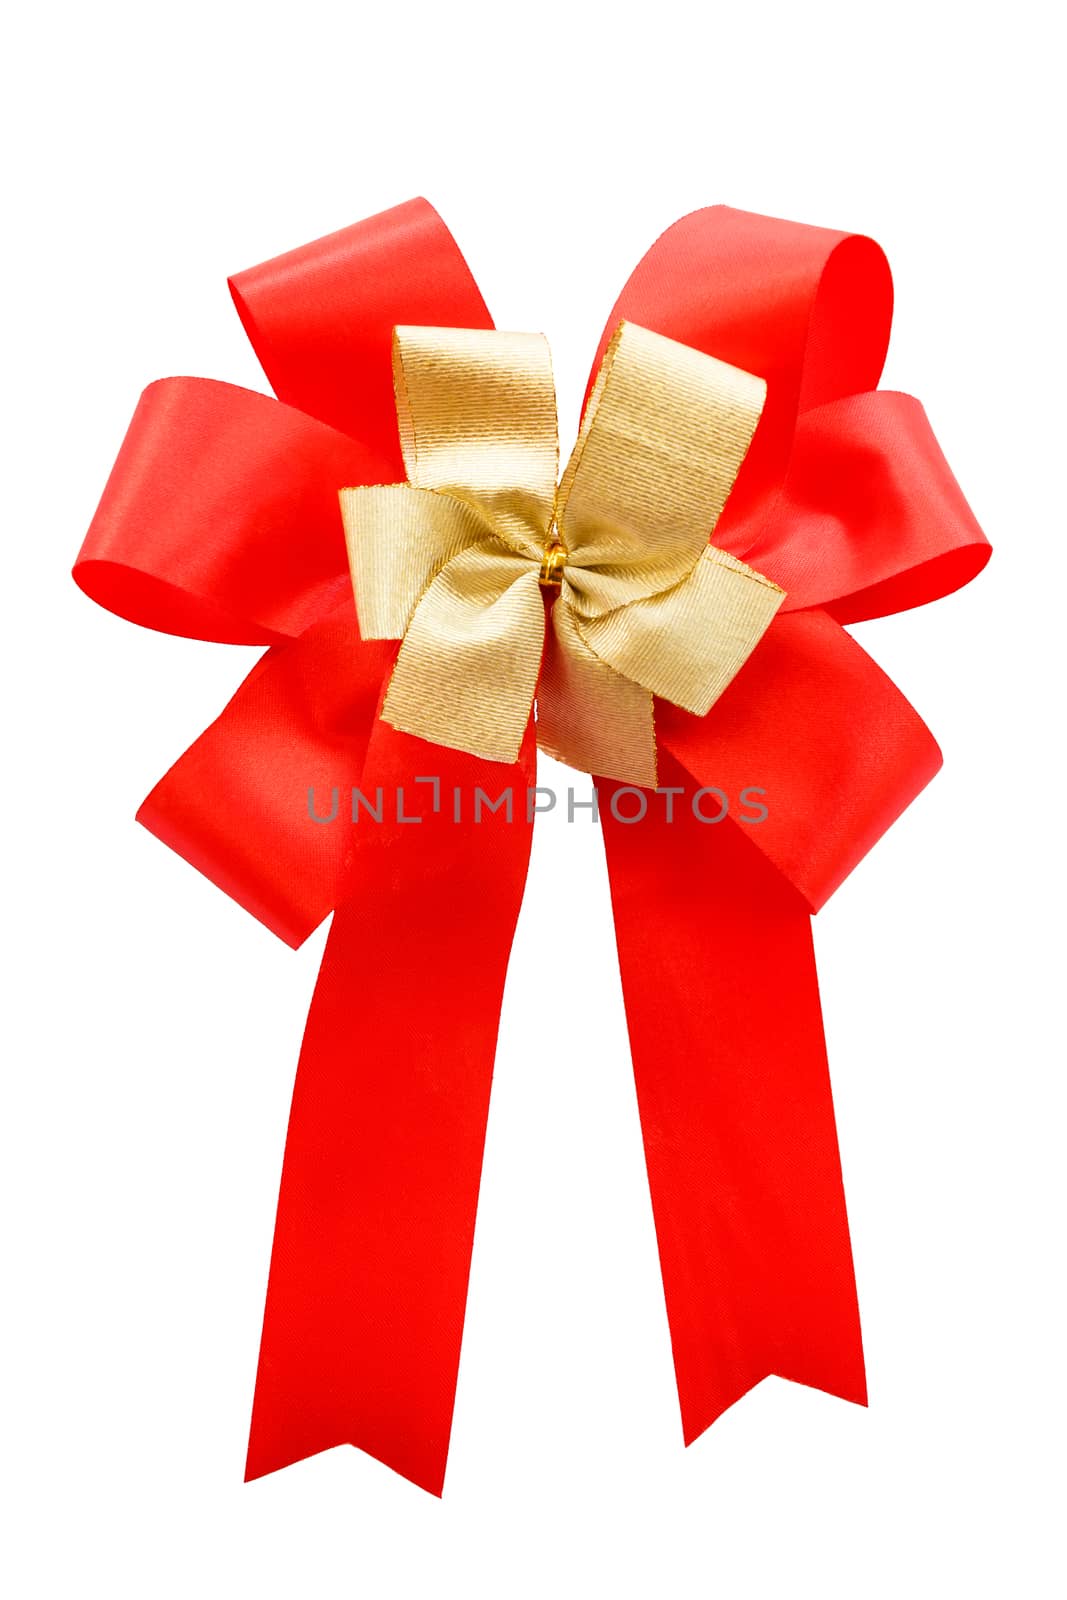 red and gold color bow on white background (isolated)